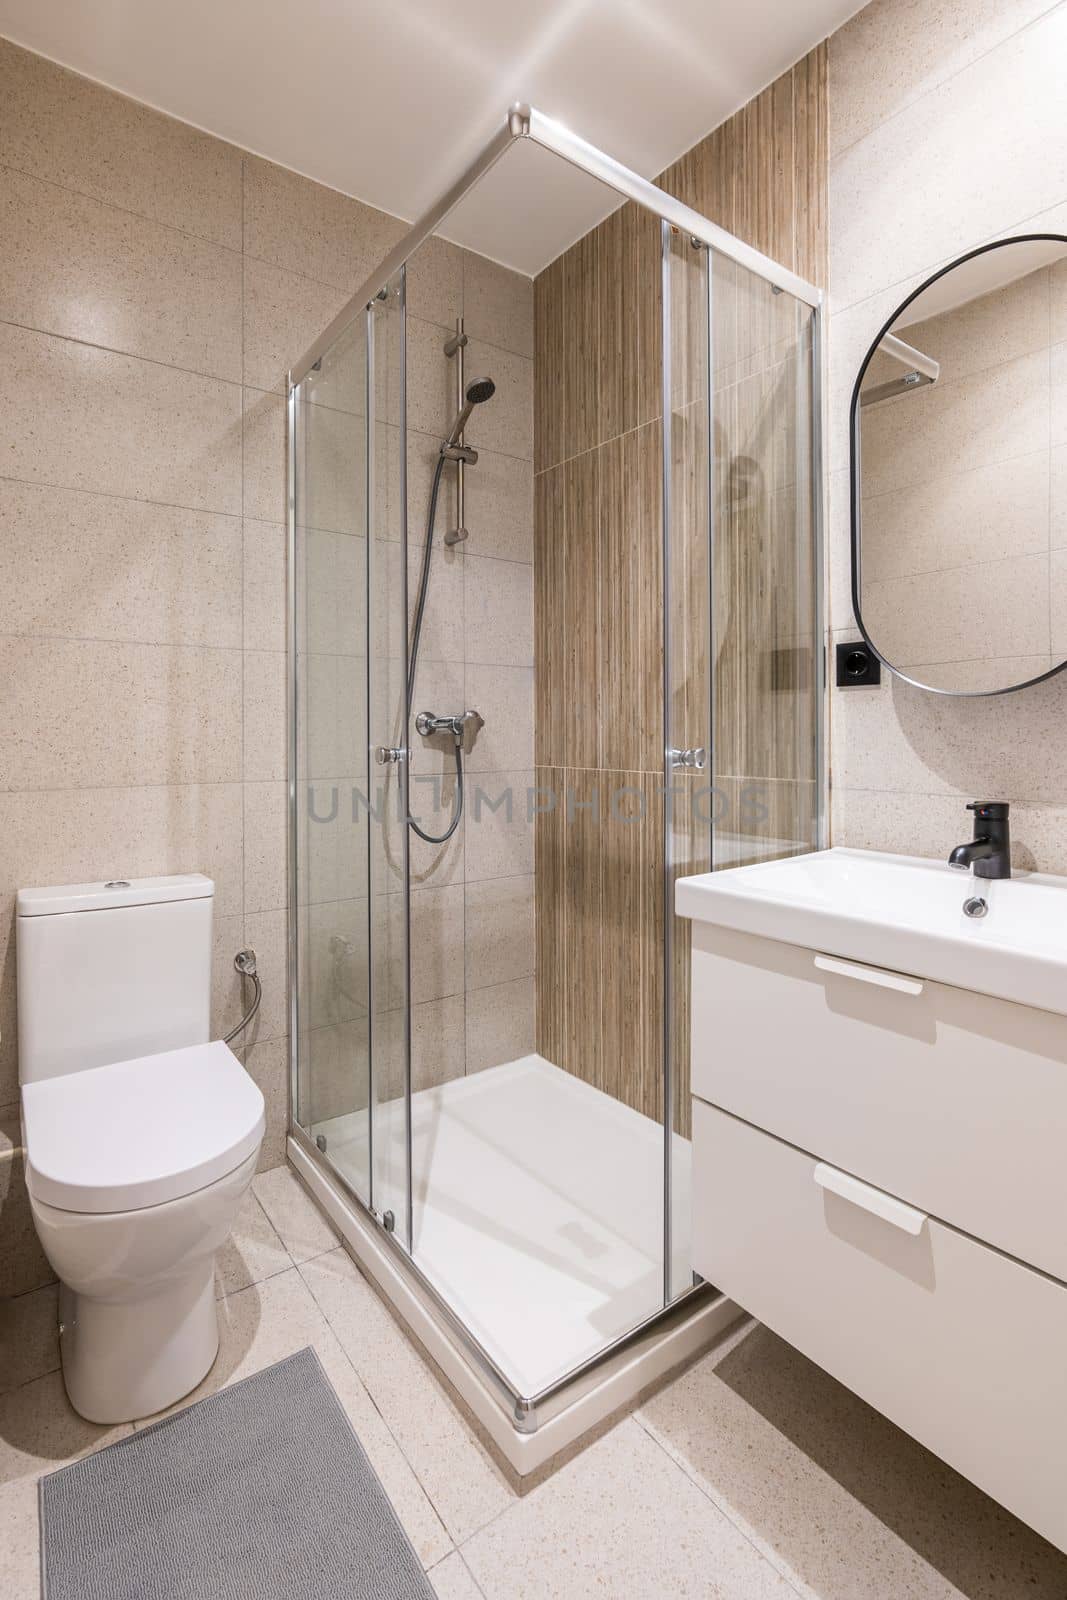 Design of a modern bathroom, with trendy furniture, beige tiles, a modern washbasin and a round mirror